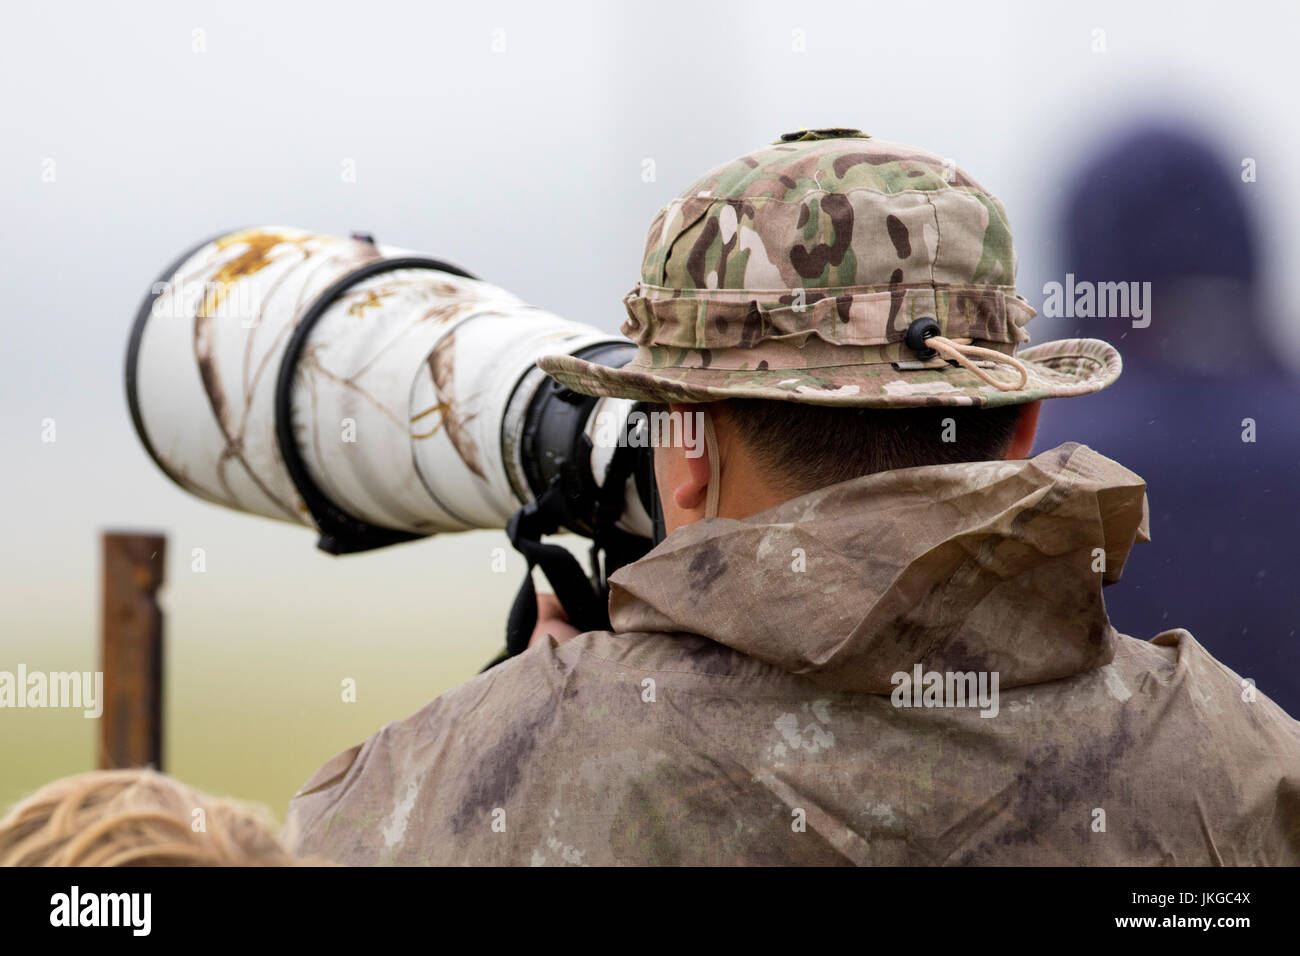 Professional photographer wearing camouflage shooting with a canon camera and EF500mm f4 super telephoto lens Stock Photo